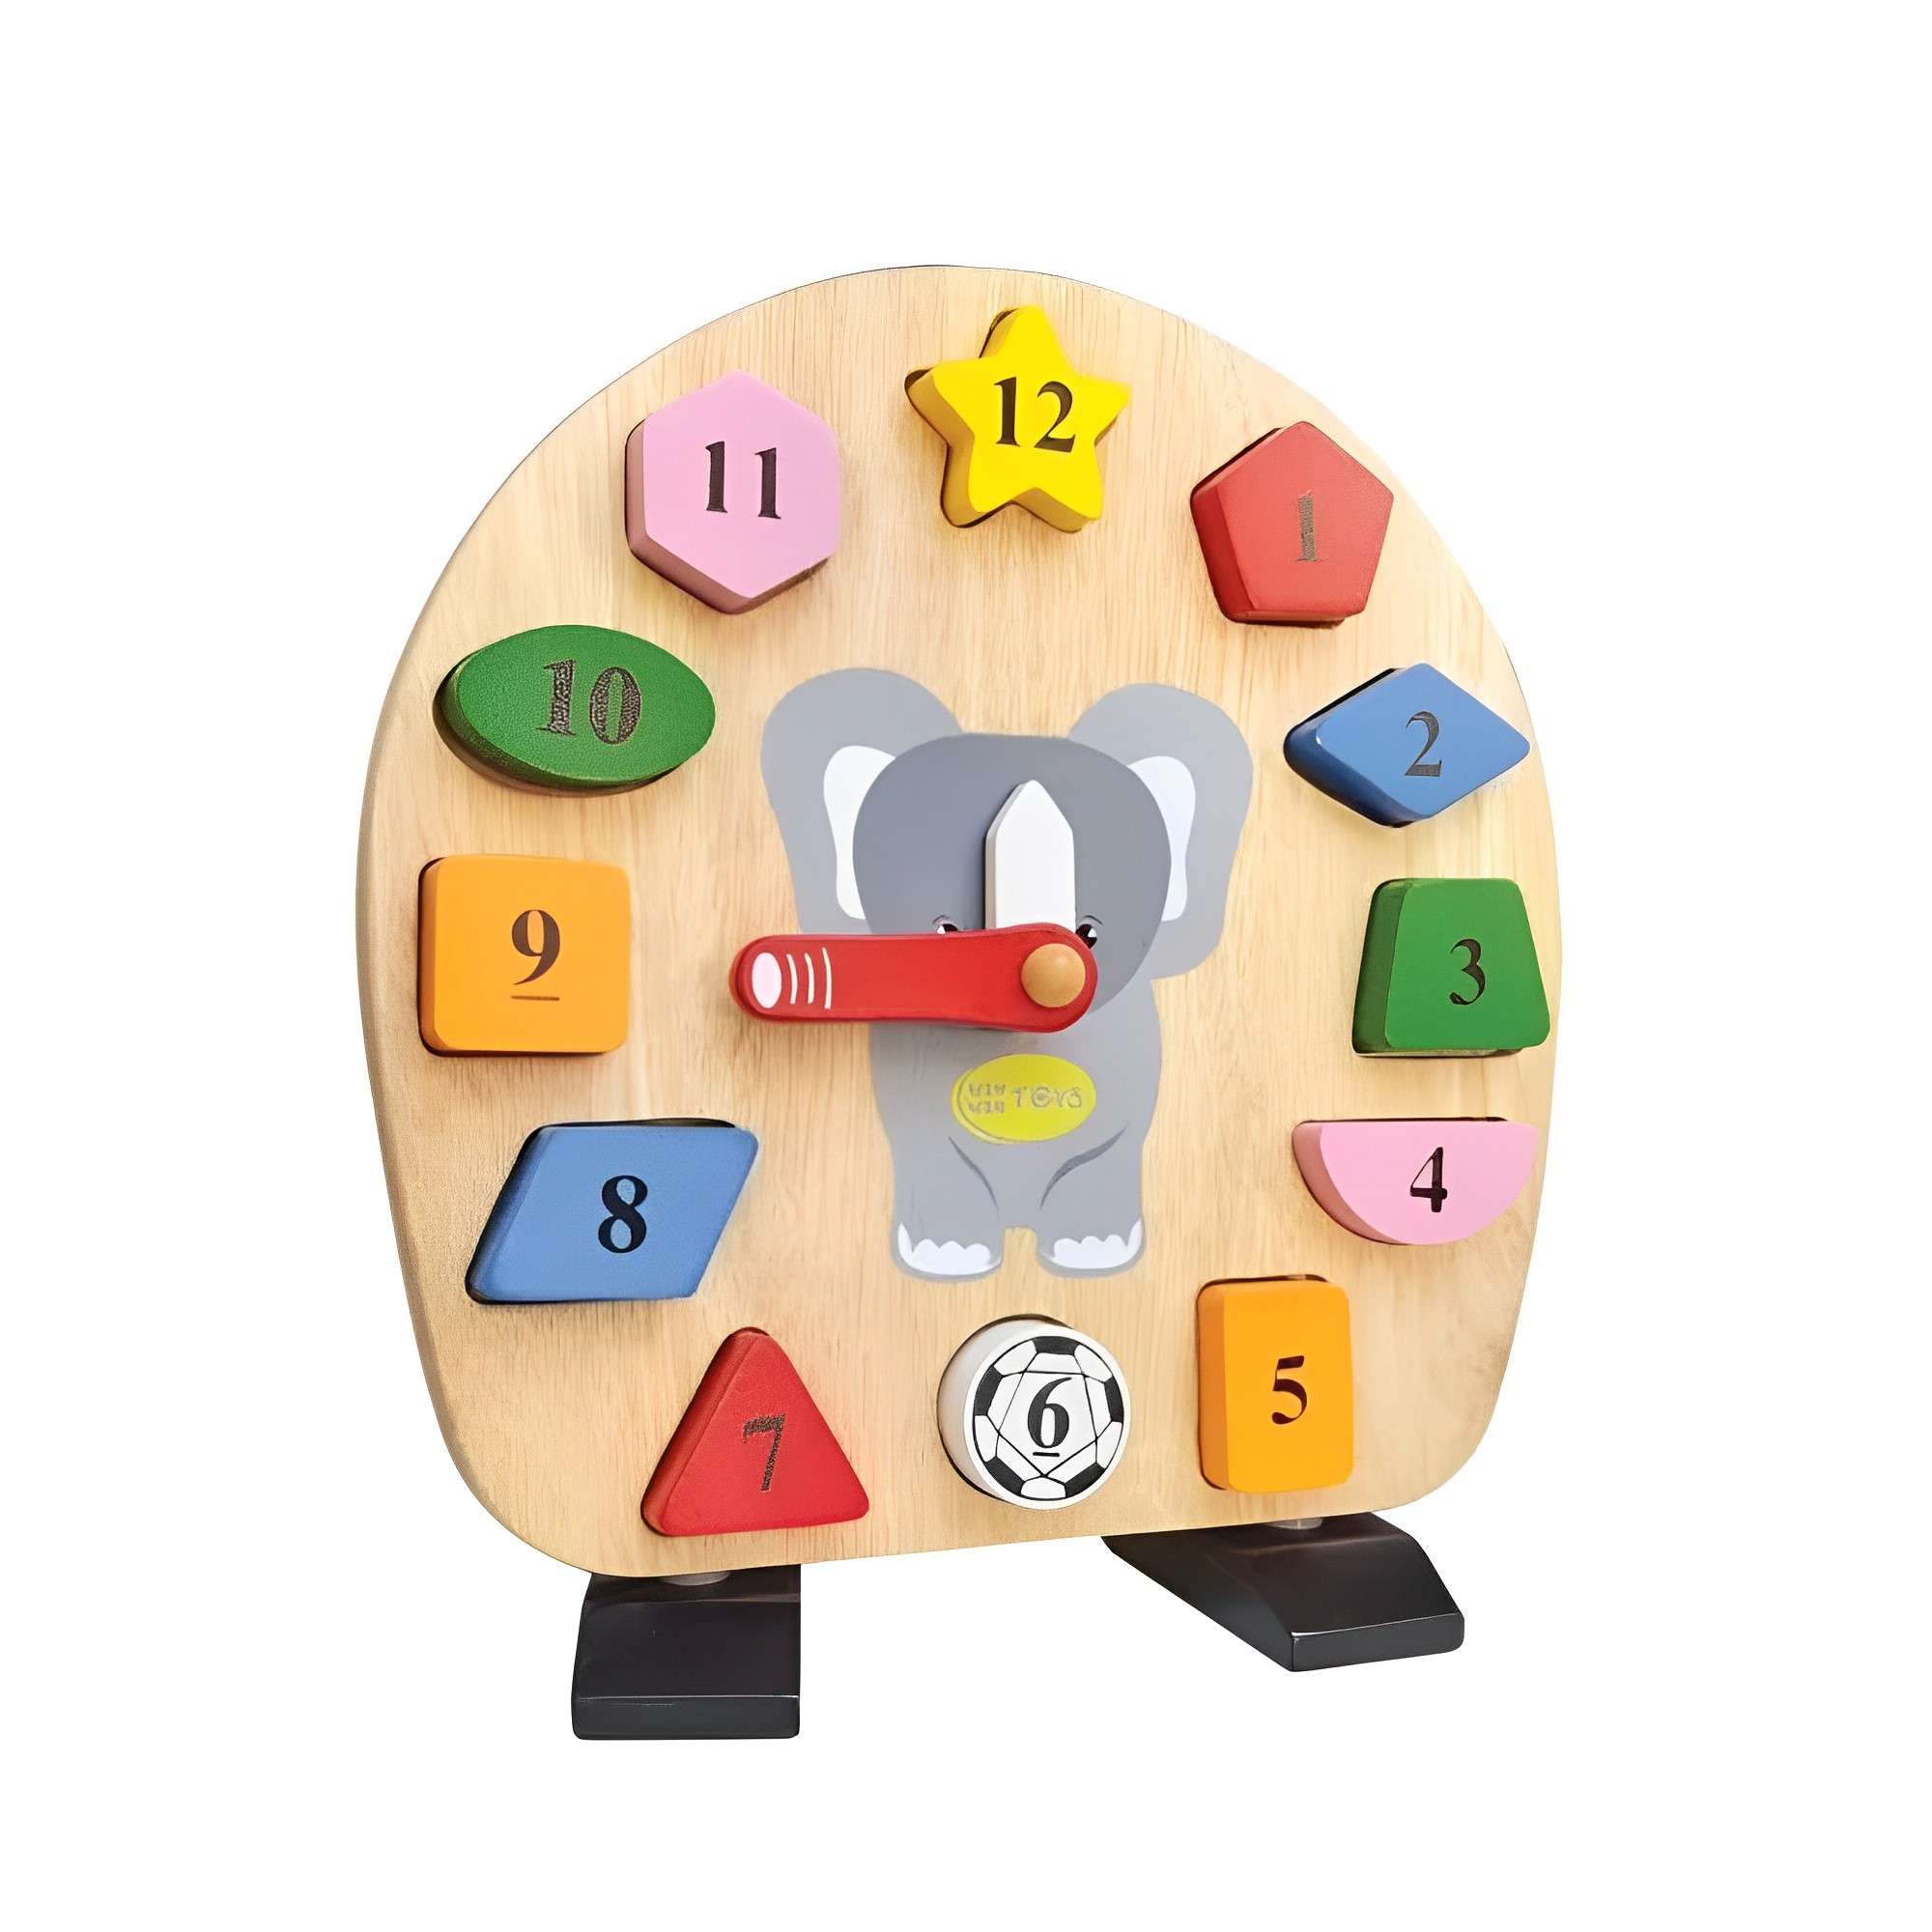 Wooden Elephant Shape Sorting Clock Color Educational Toys For 3 Year Olds, Montessori Wooden Toys